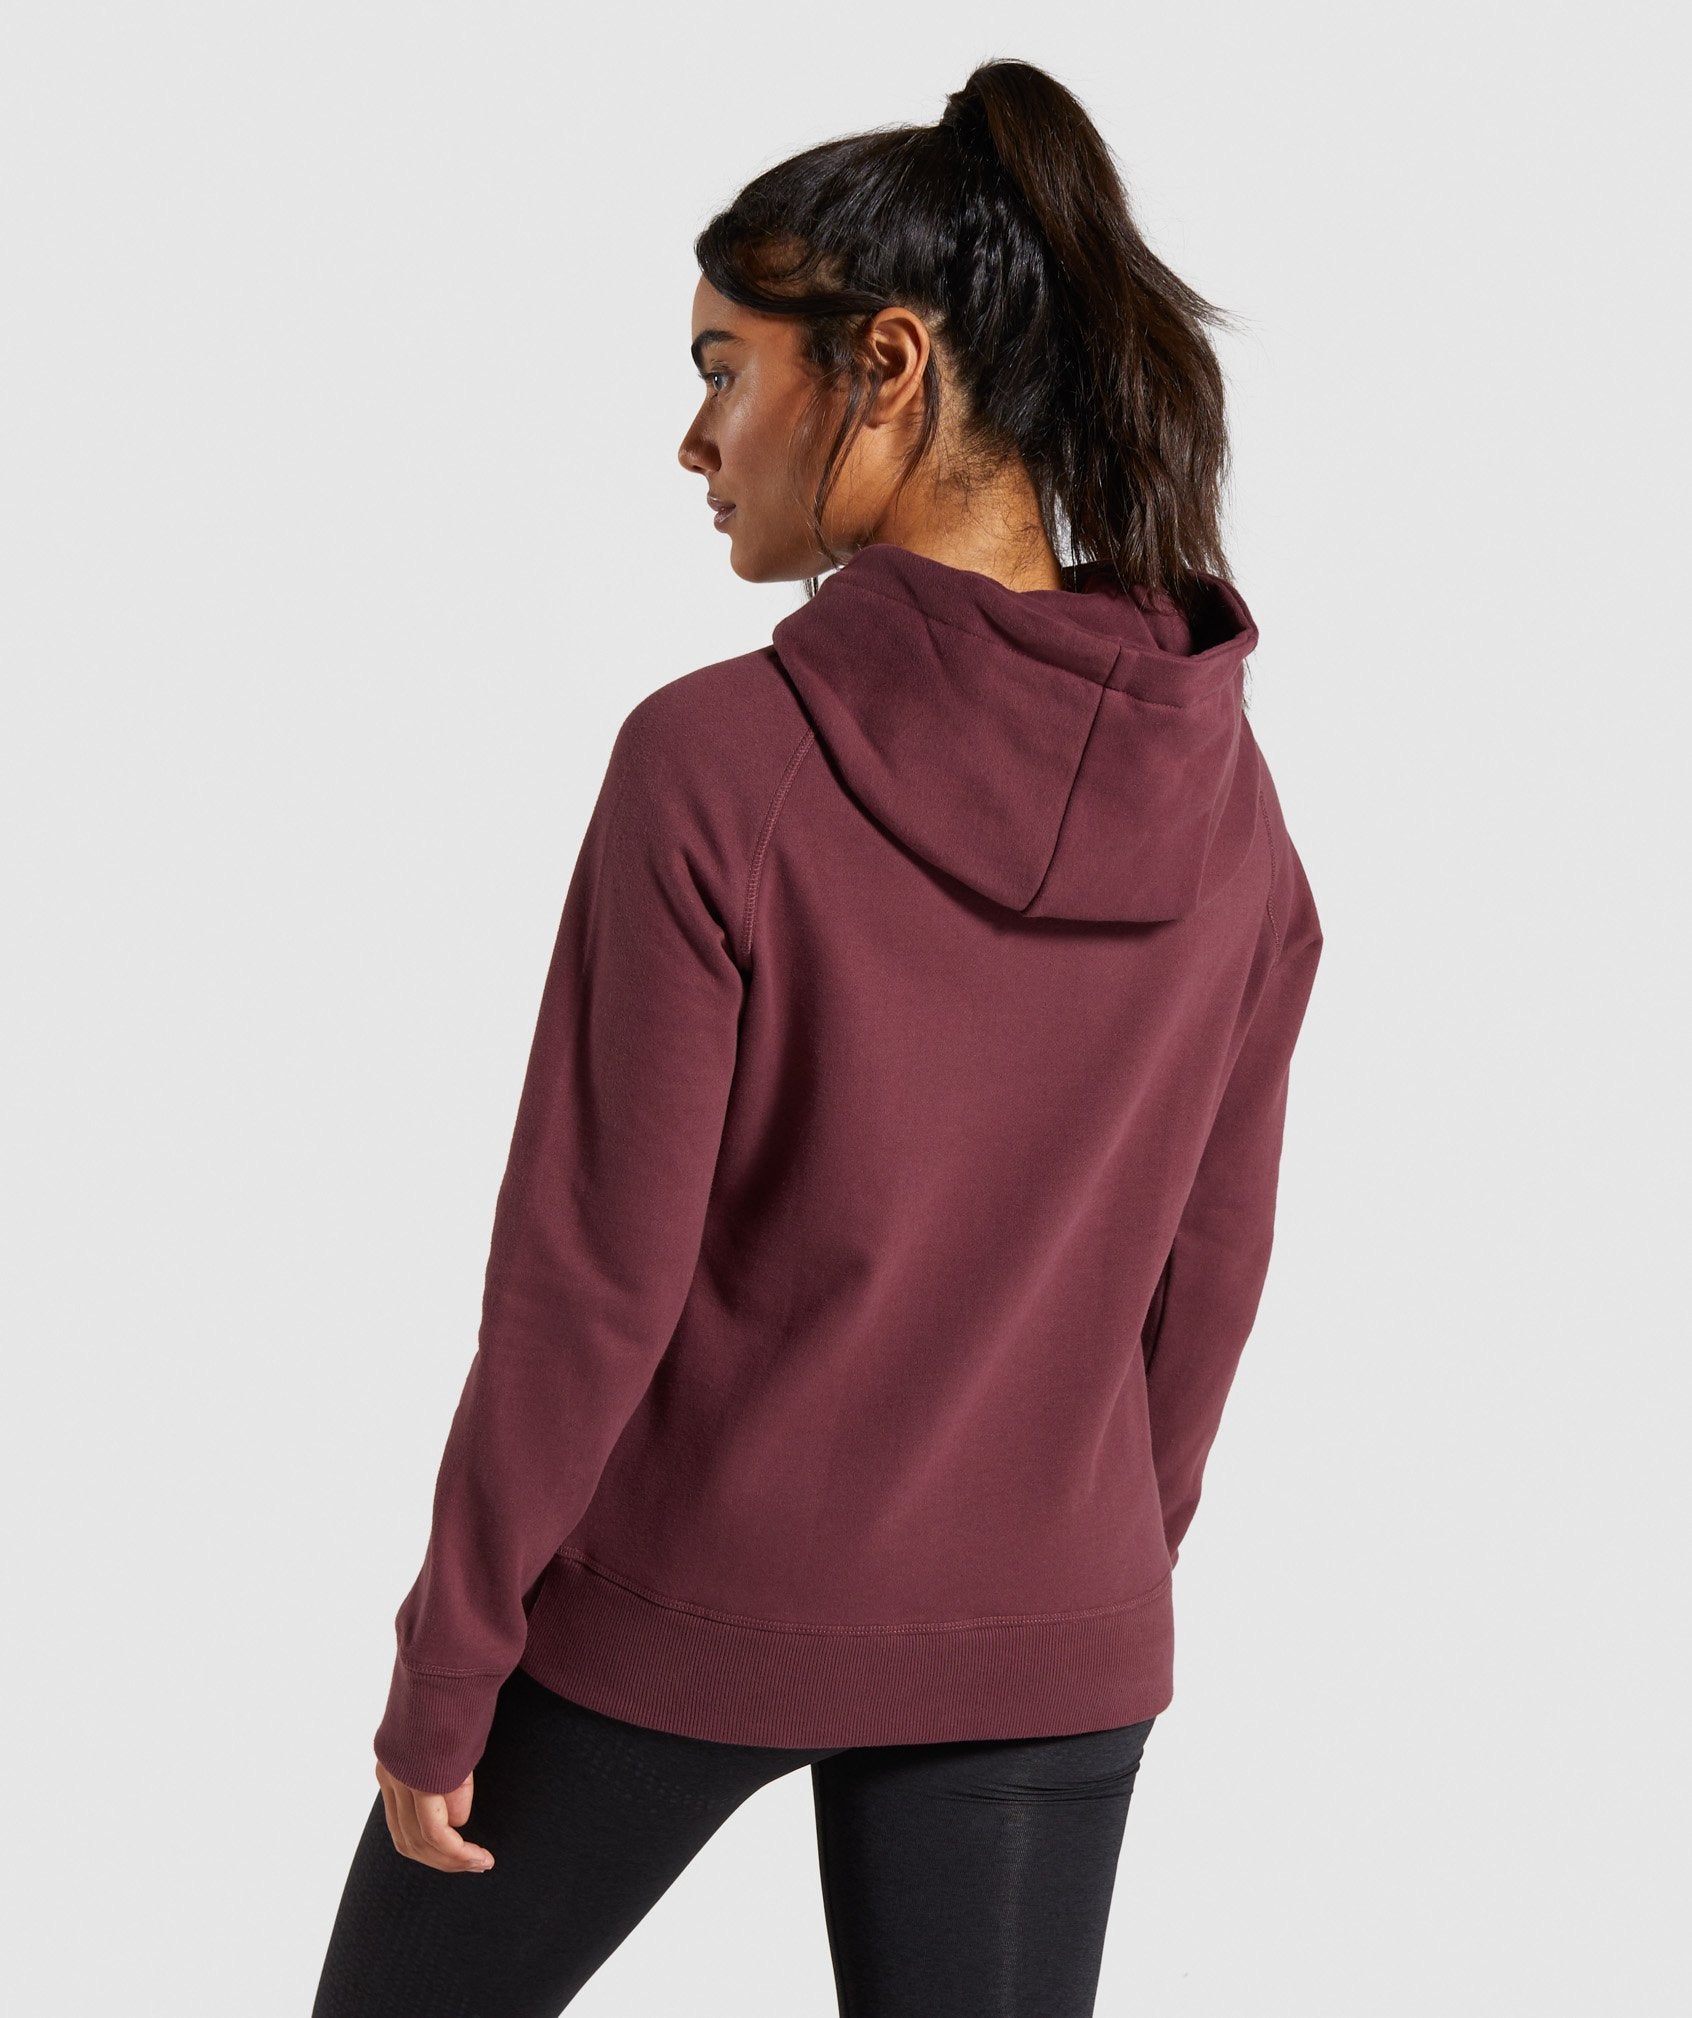 Apollo Hoodie in Berry Red